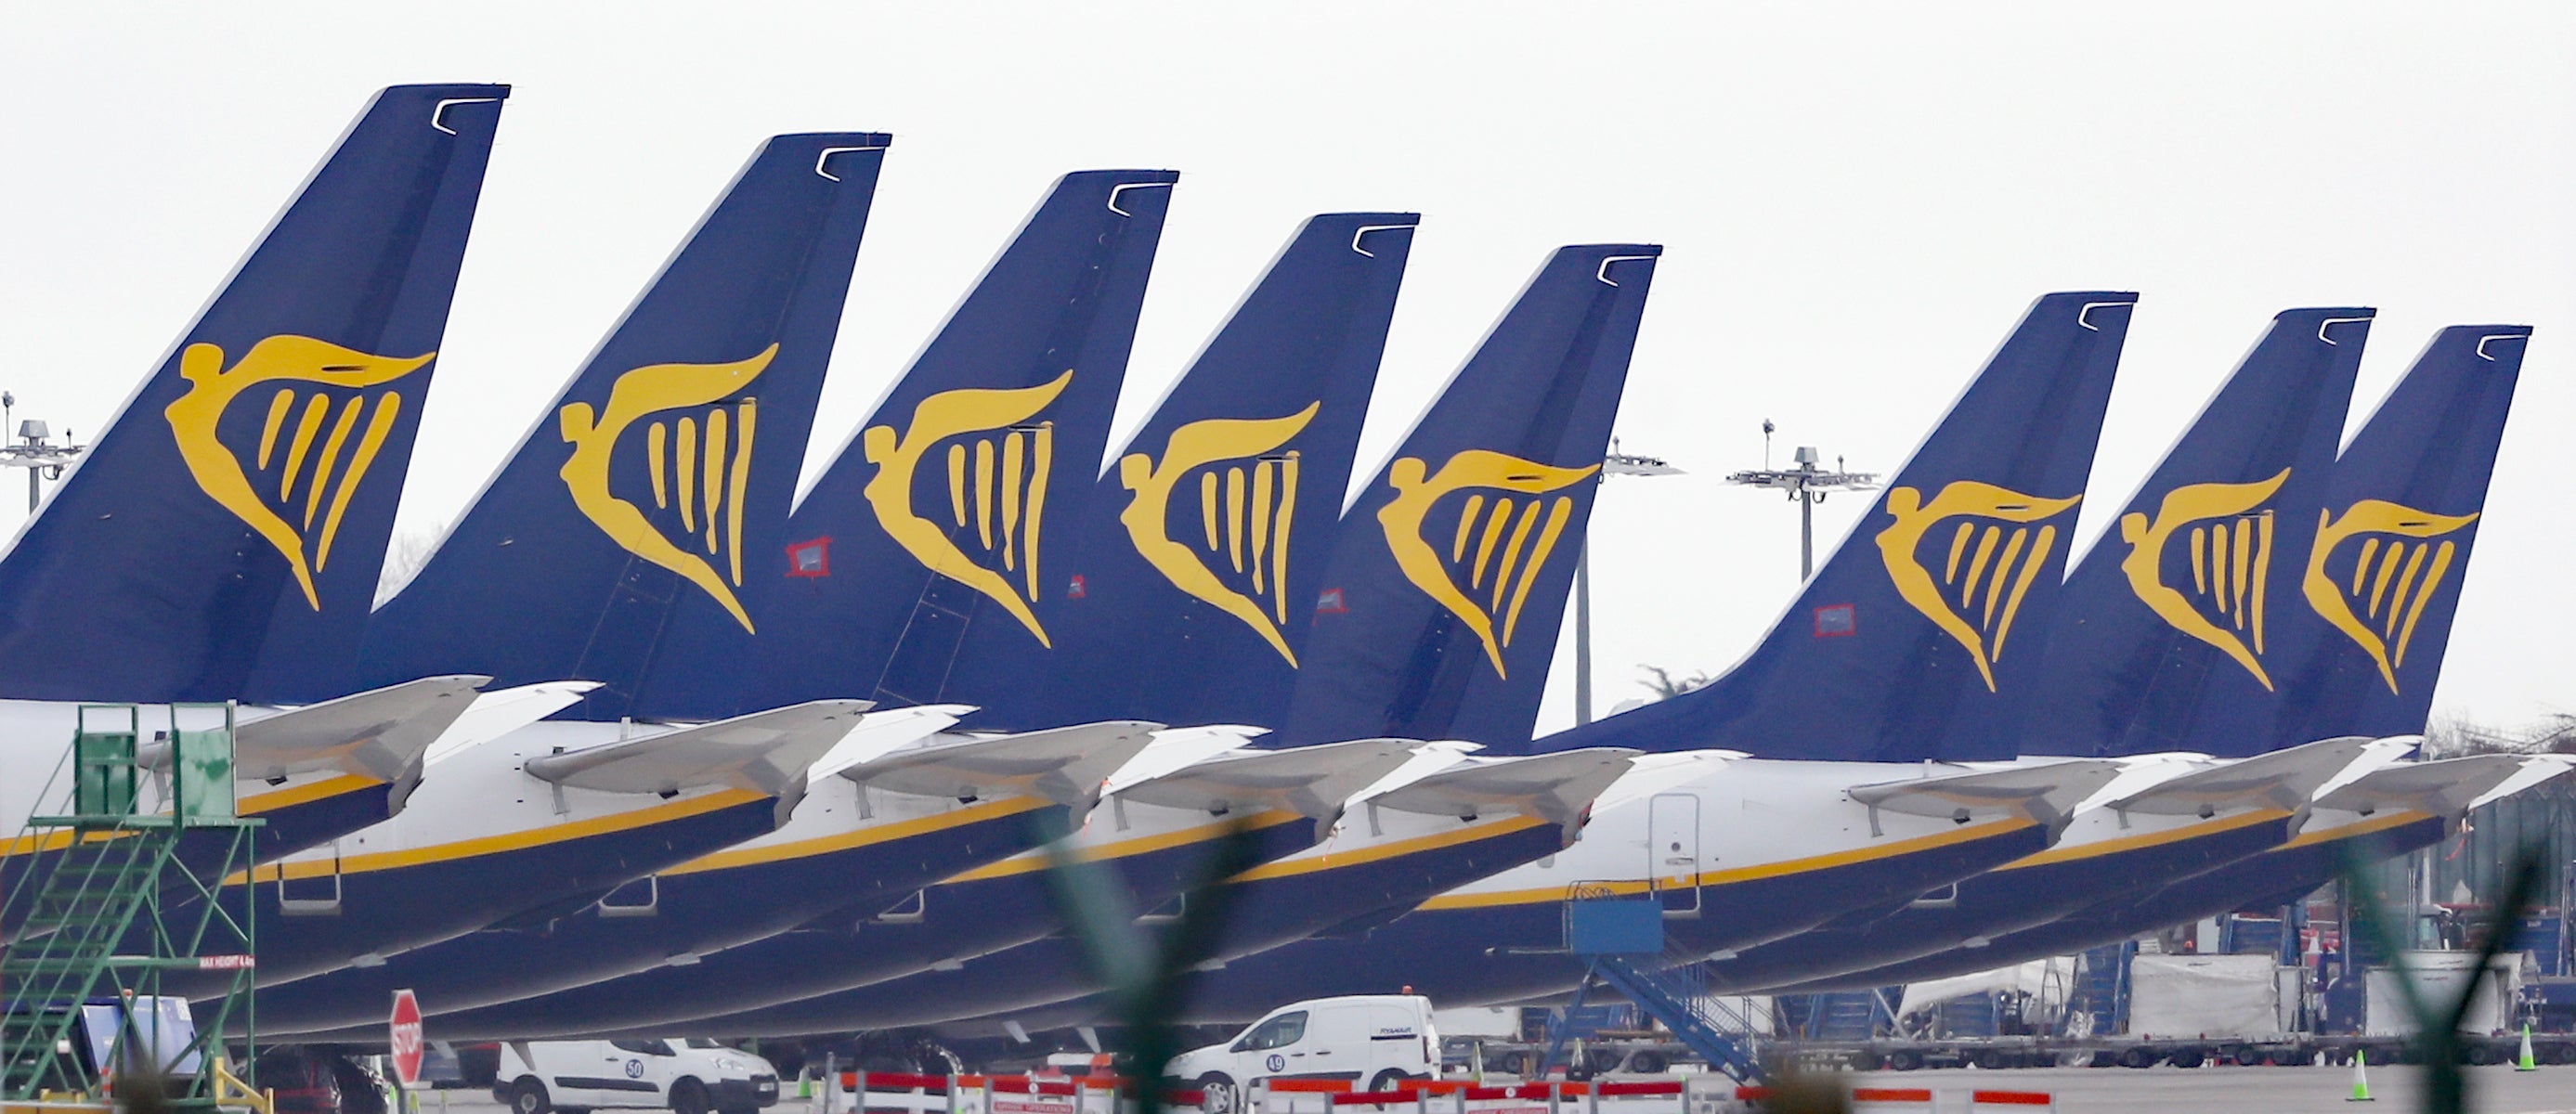 Ryanair still saw a strong recovery from the worst parts of the pandemic (Niall Carson/PA)